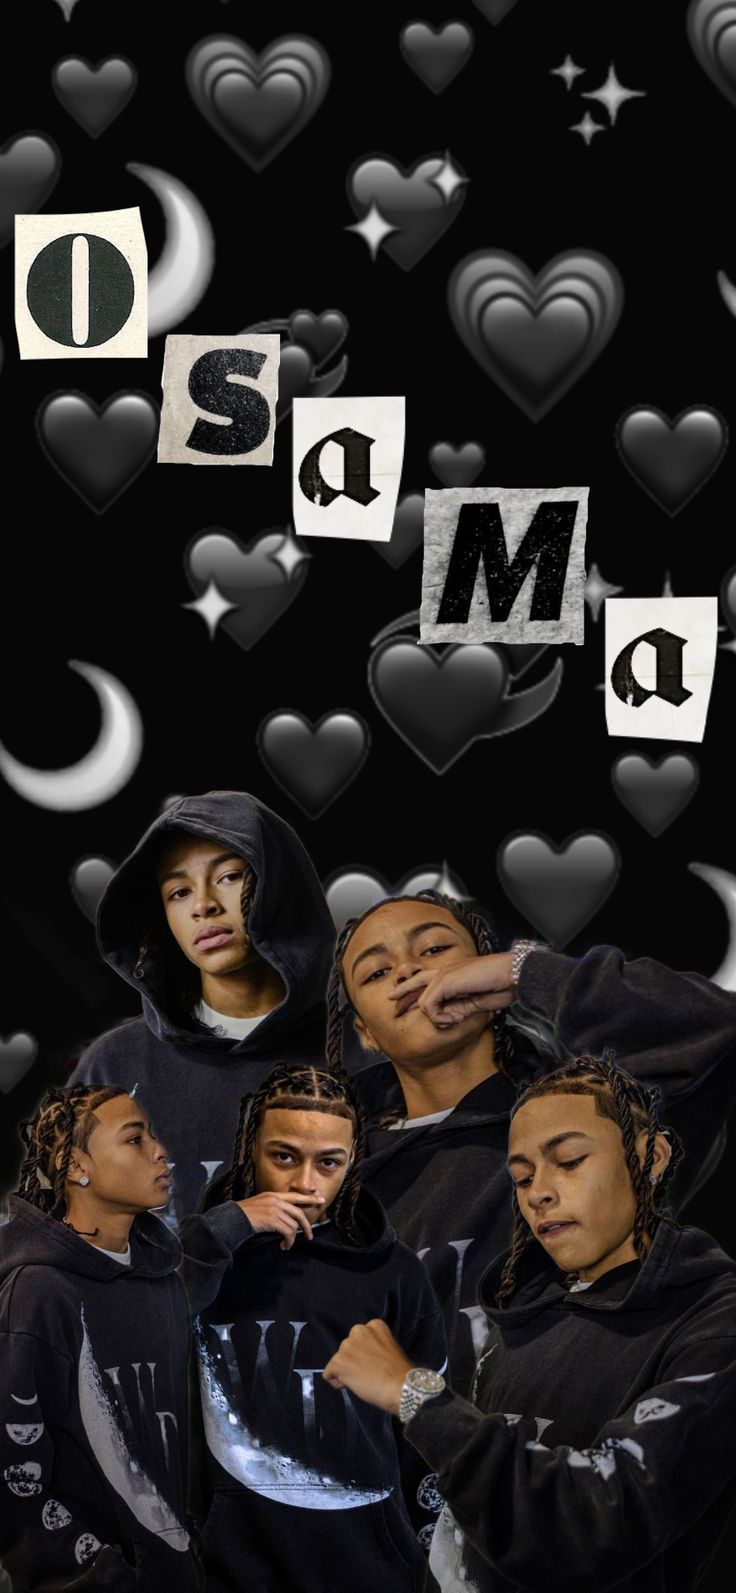 ddot osama wallpapers for your phoneTikTok Search